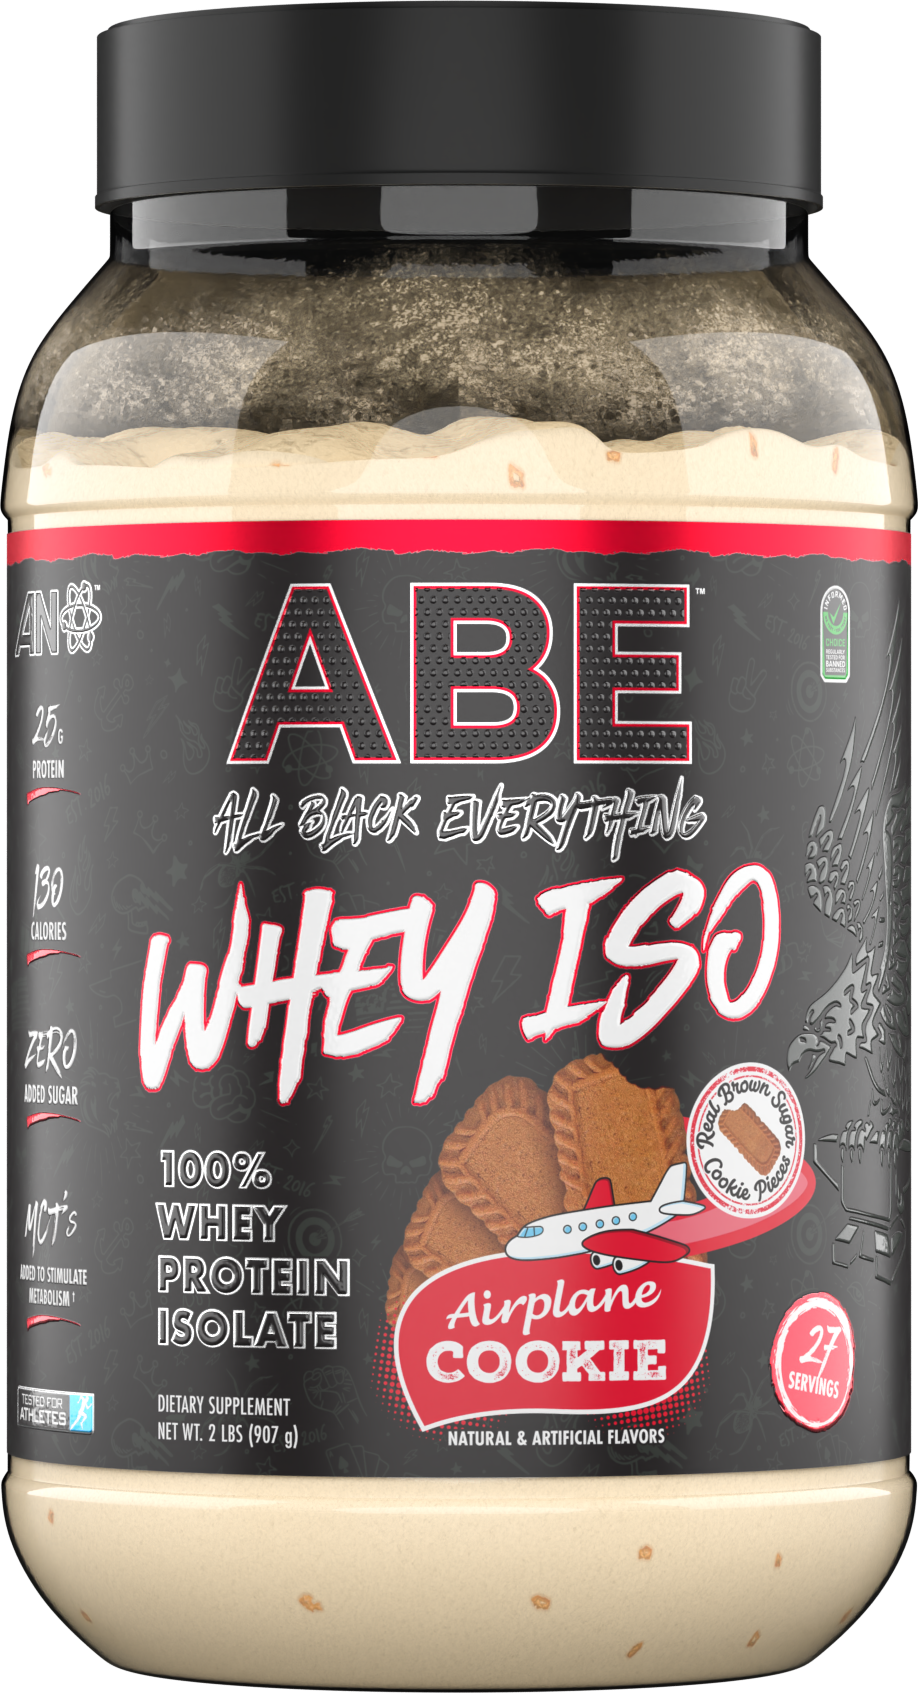 All Black Everything ABE Whey ISO | Save at PricePlow